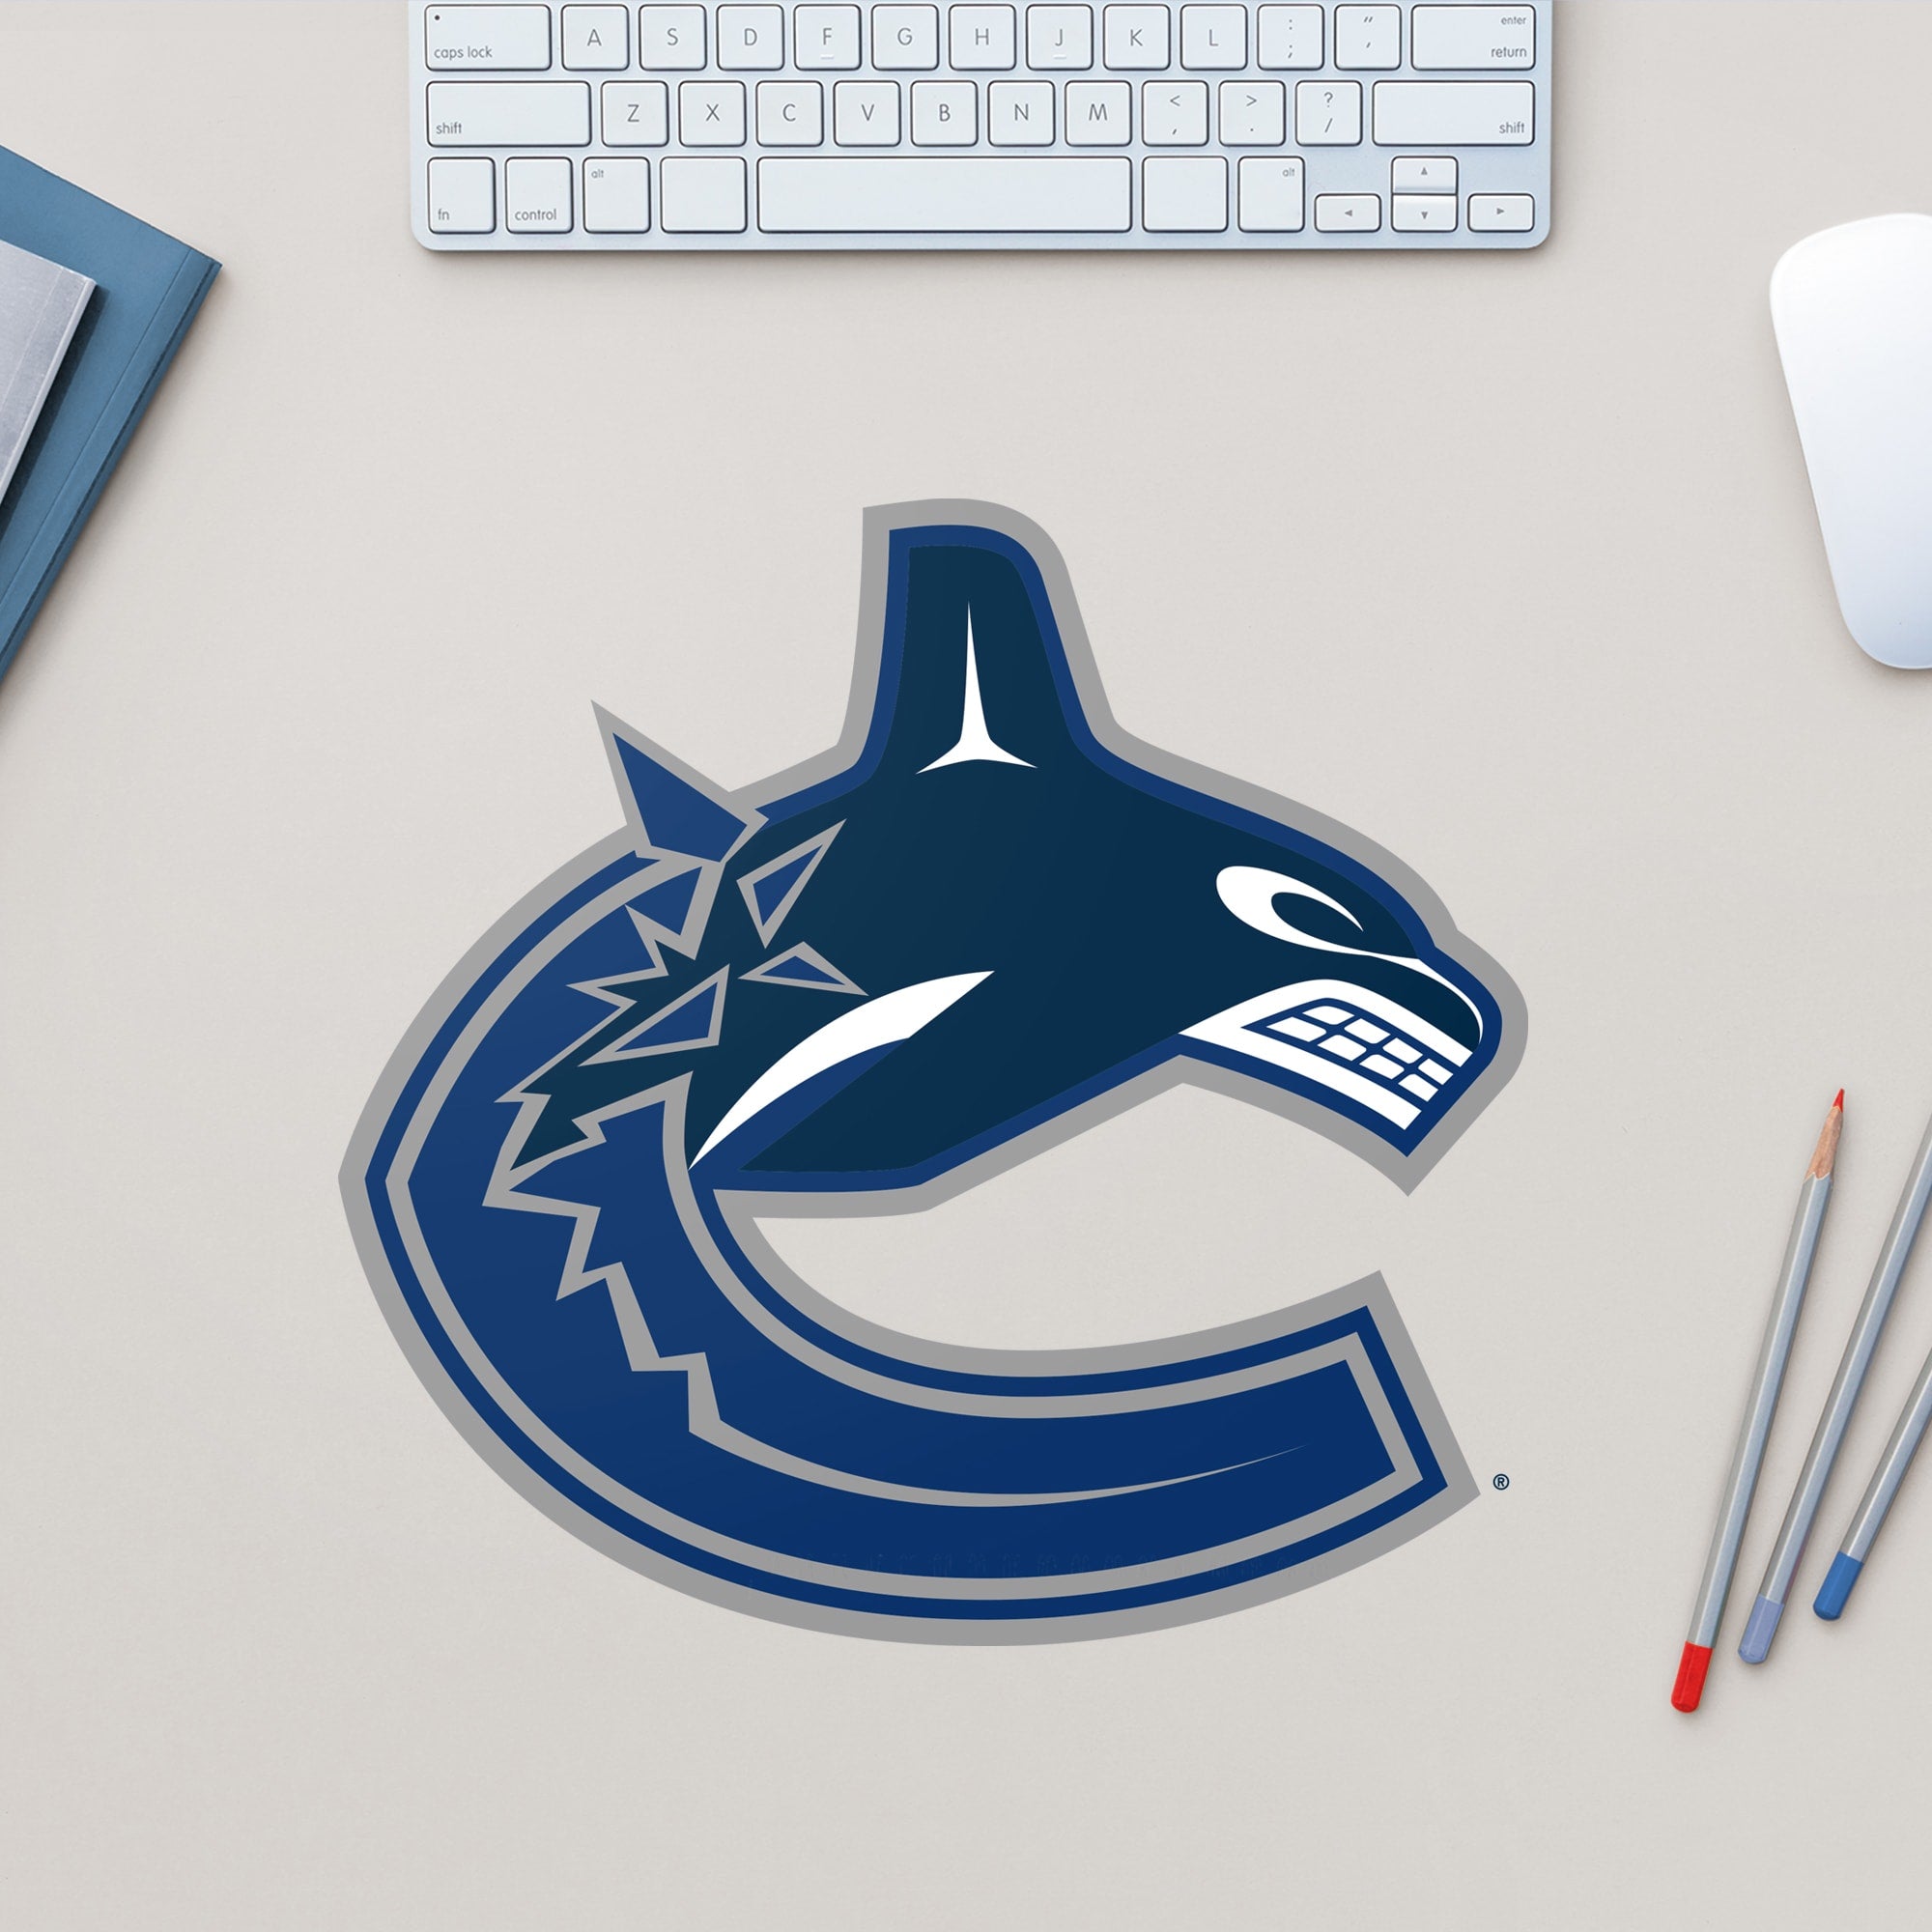 Vancouver Canucks: Logo - Officially Licensed NHL Removable Wall Decal Large by Fathead | Vinyl